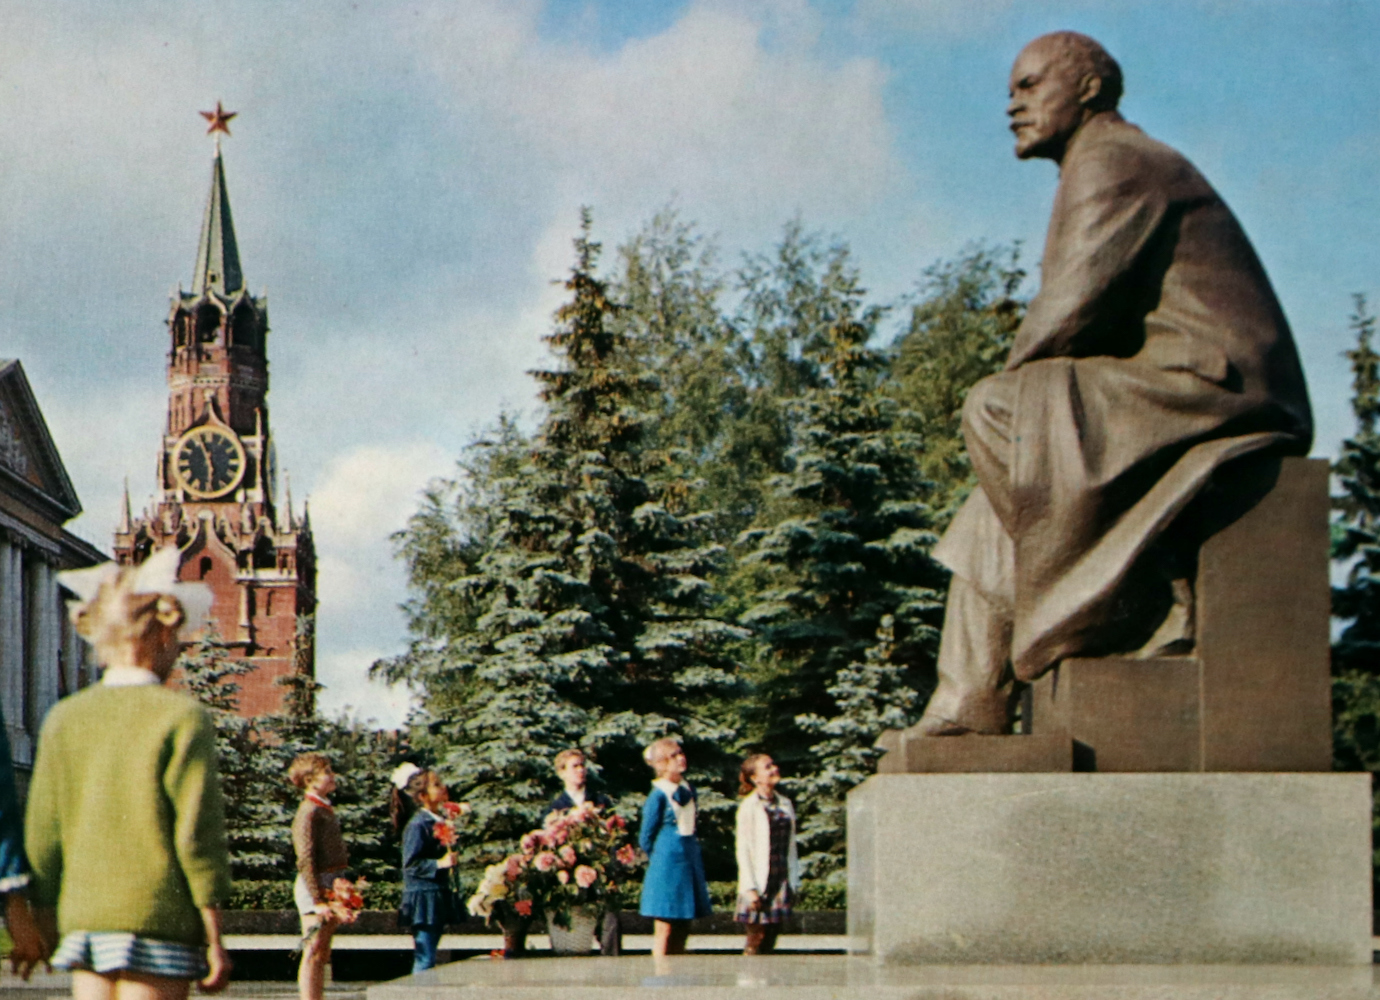 Looking for Lenin: hunting down banned Soviet statues in Ukraine